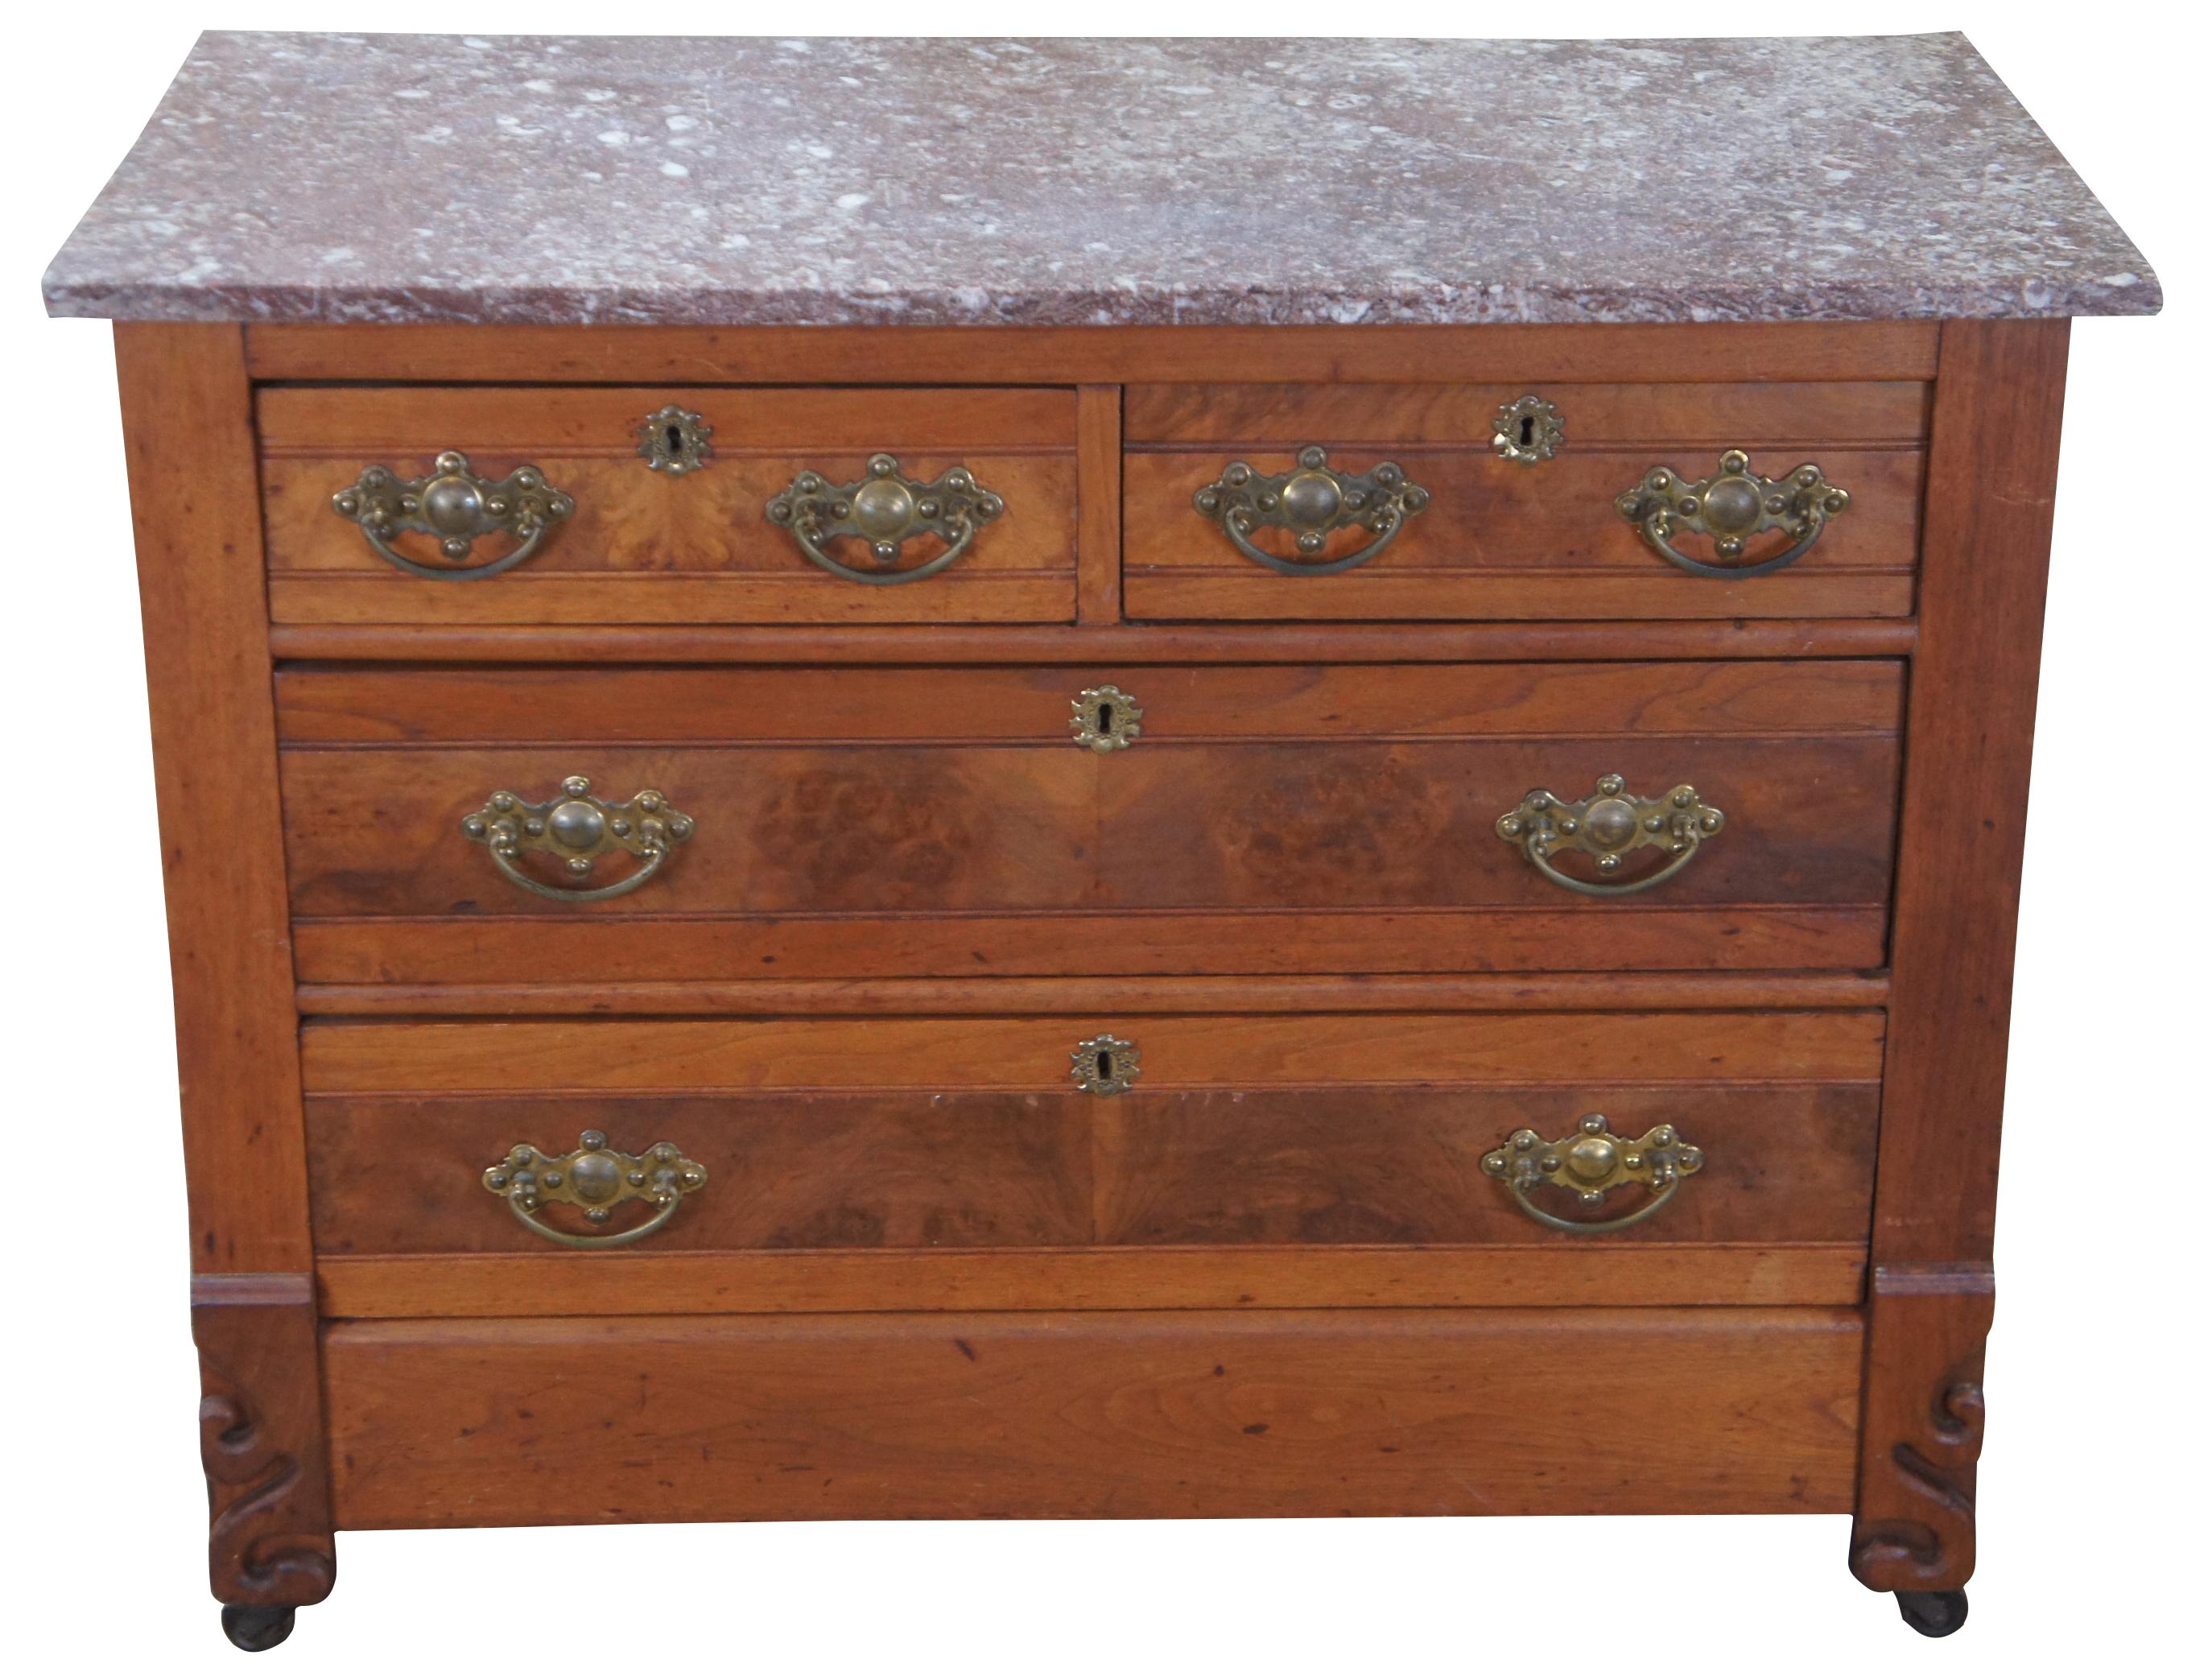 Antique Victorian Eastlake dresser featuring a granite top, four drawers, brass hardware and swivel castors. The drawers are constructed using the Knapp Joint. The Knapp joint was developed during the late Victoria Era in post-Civil War United